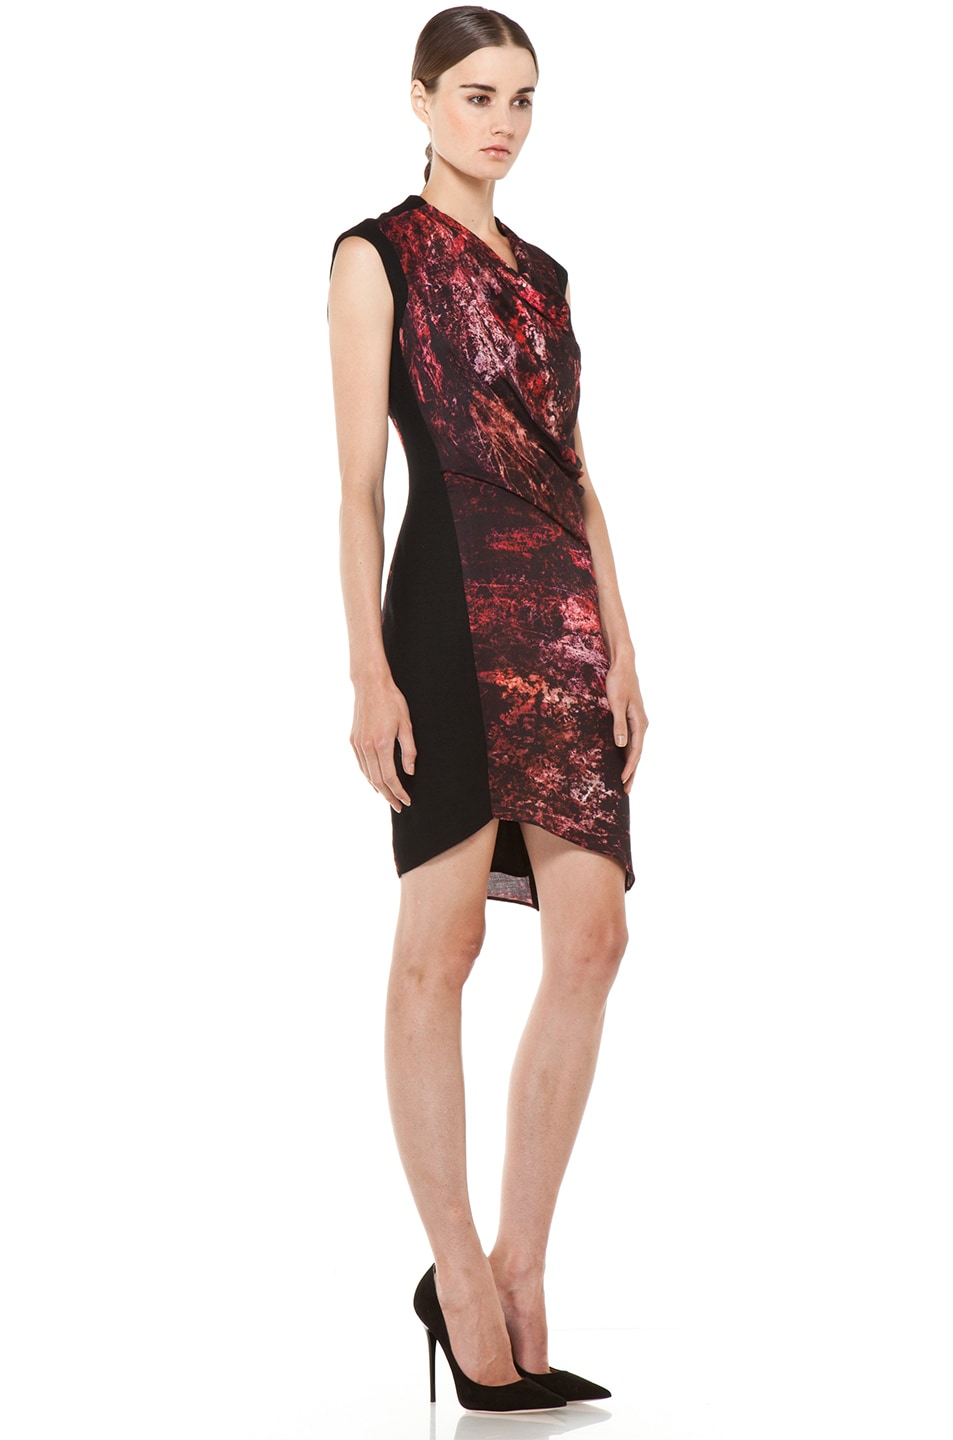 Helmut Lang Midnight Floral Twill Dress in Red Multi | FWRD